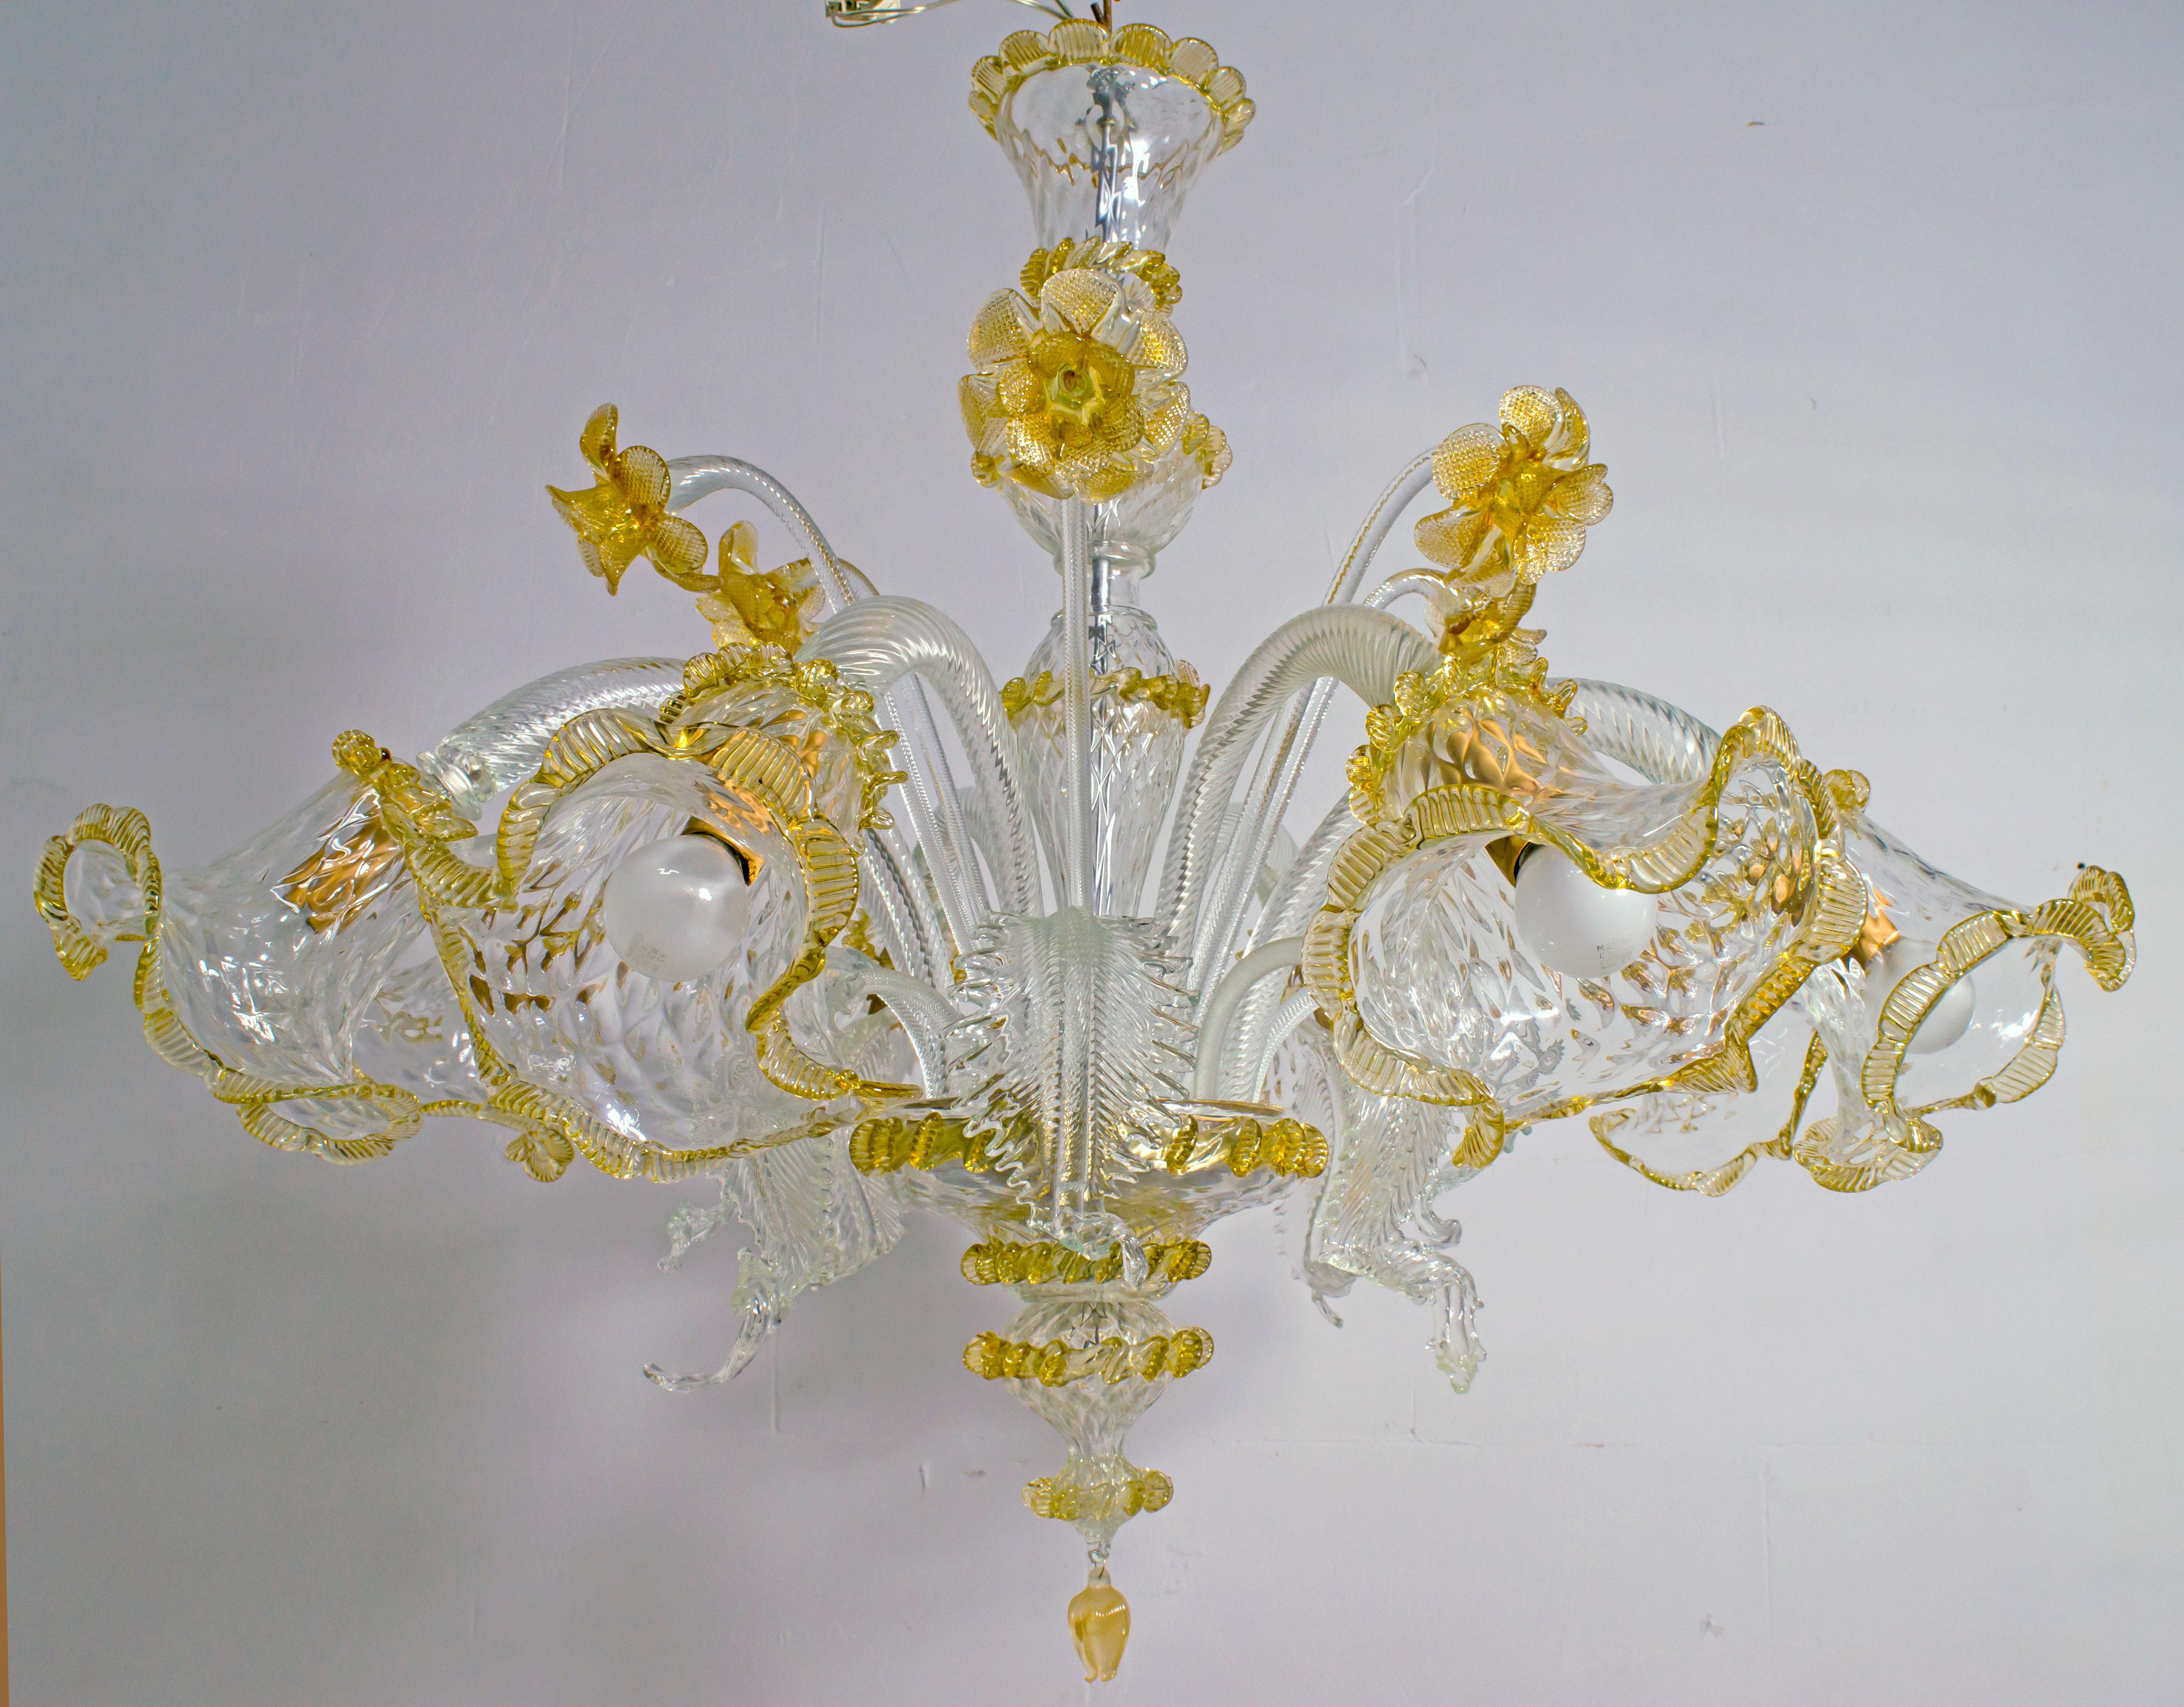 An elegant eight-light chandelier in Murano glass of transparent color and sophisticated antique gold finish. With a centered bulbous column that emits branches and flowers and finely cuts the Murano glass leaves.

Ca'Rezzonico is the name of a